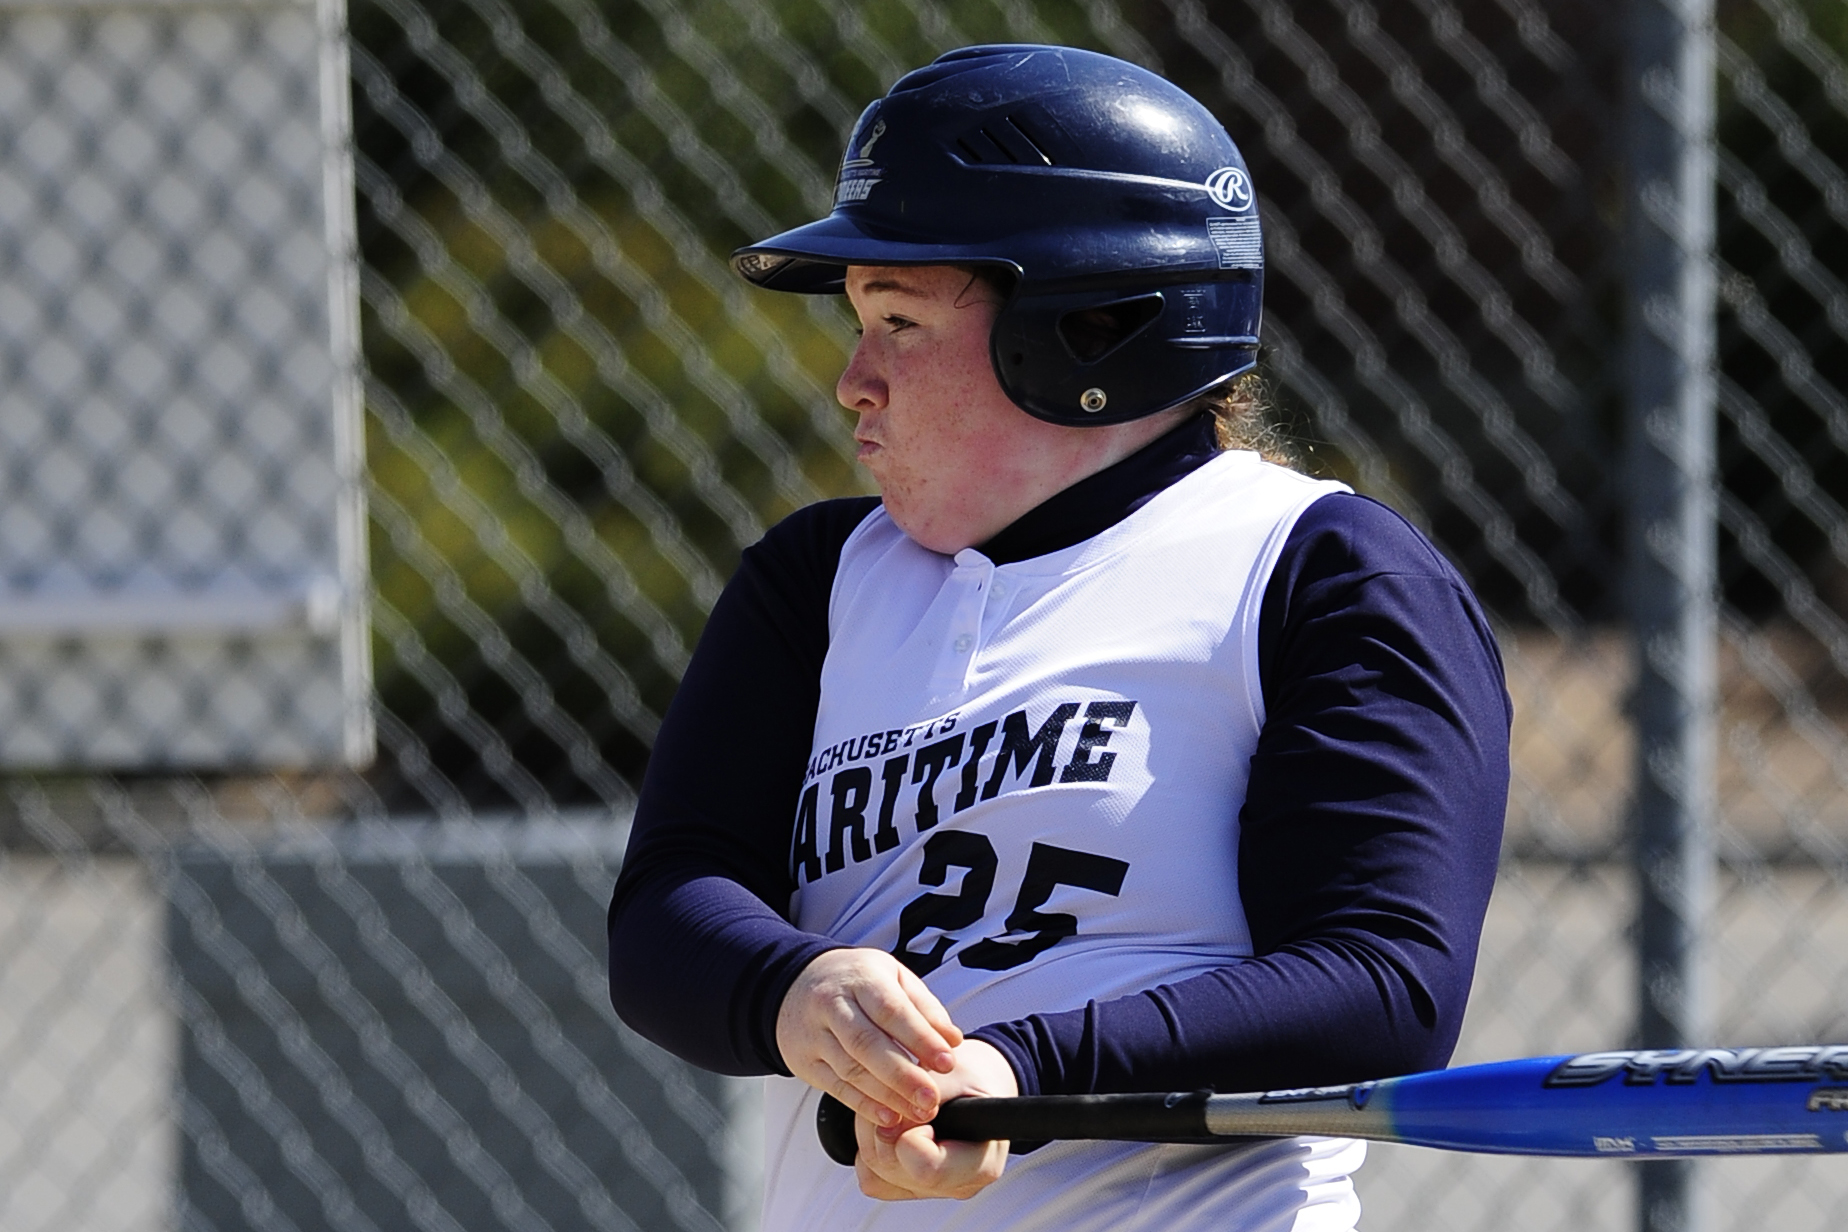 Beaulieu, Thibeault Each Collect Pair Of Hits As Softball Drops MASCAC Doubleheader At Salem State